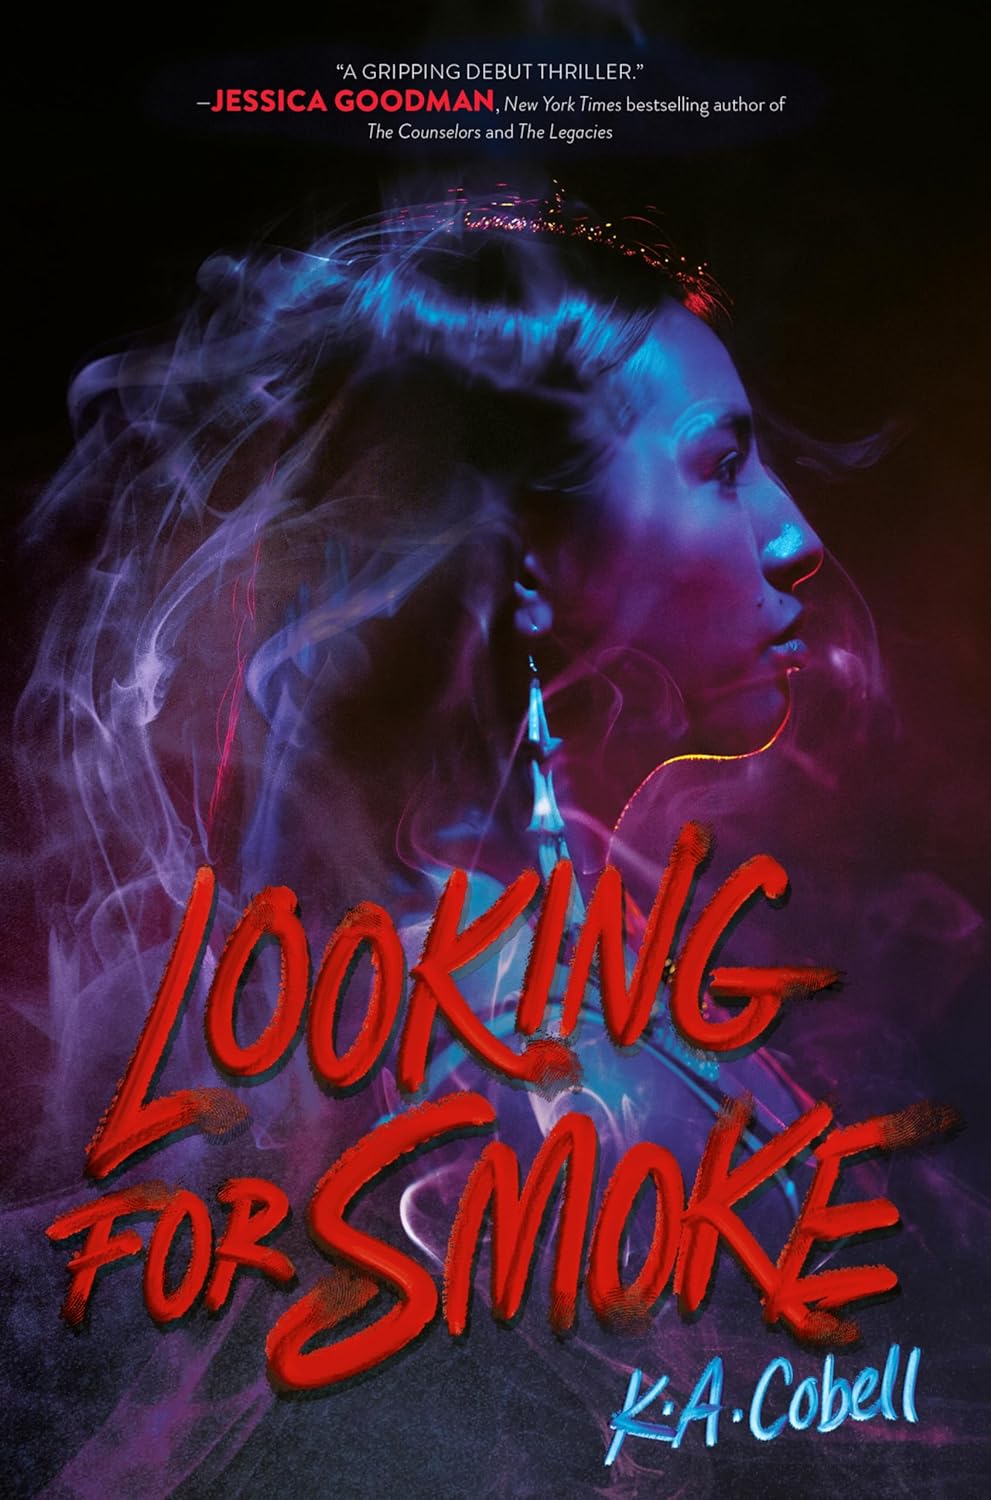 Looking for Smoke by K. A. Cobell 